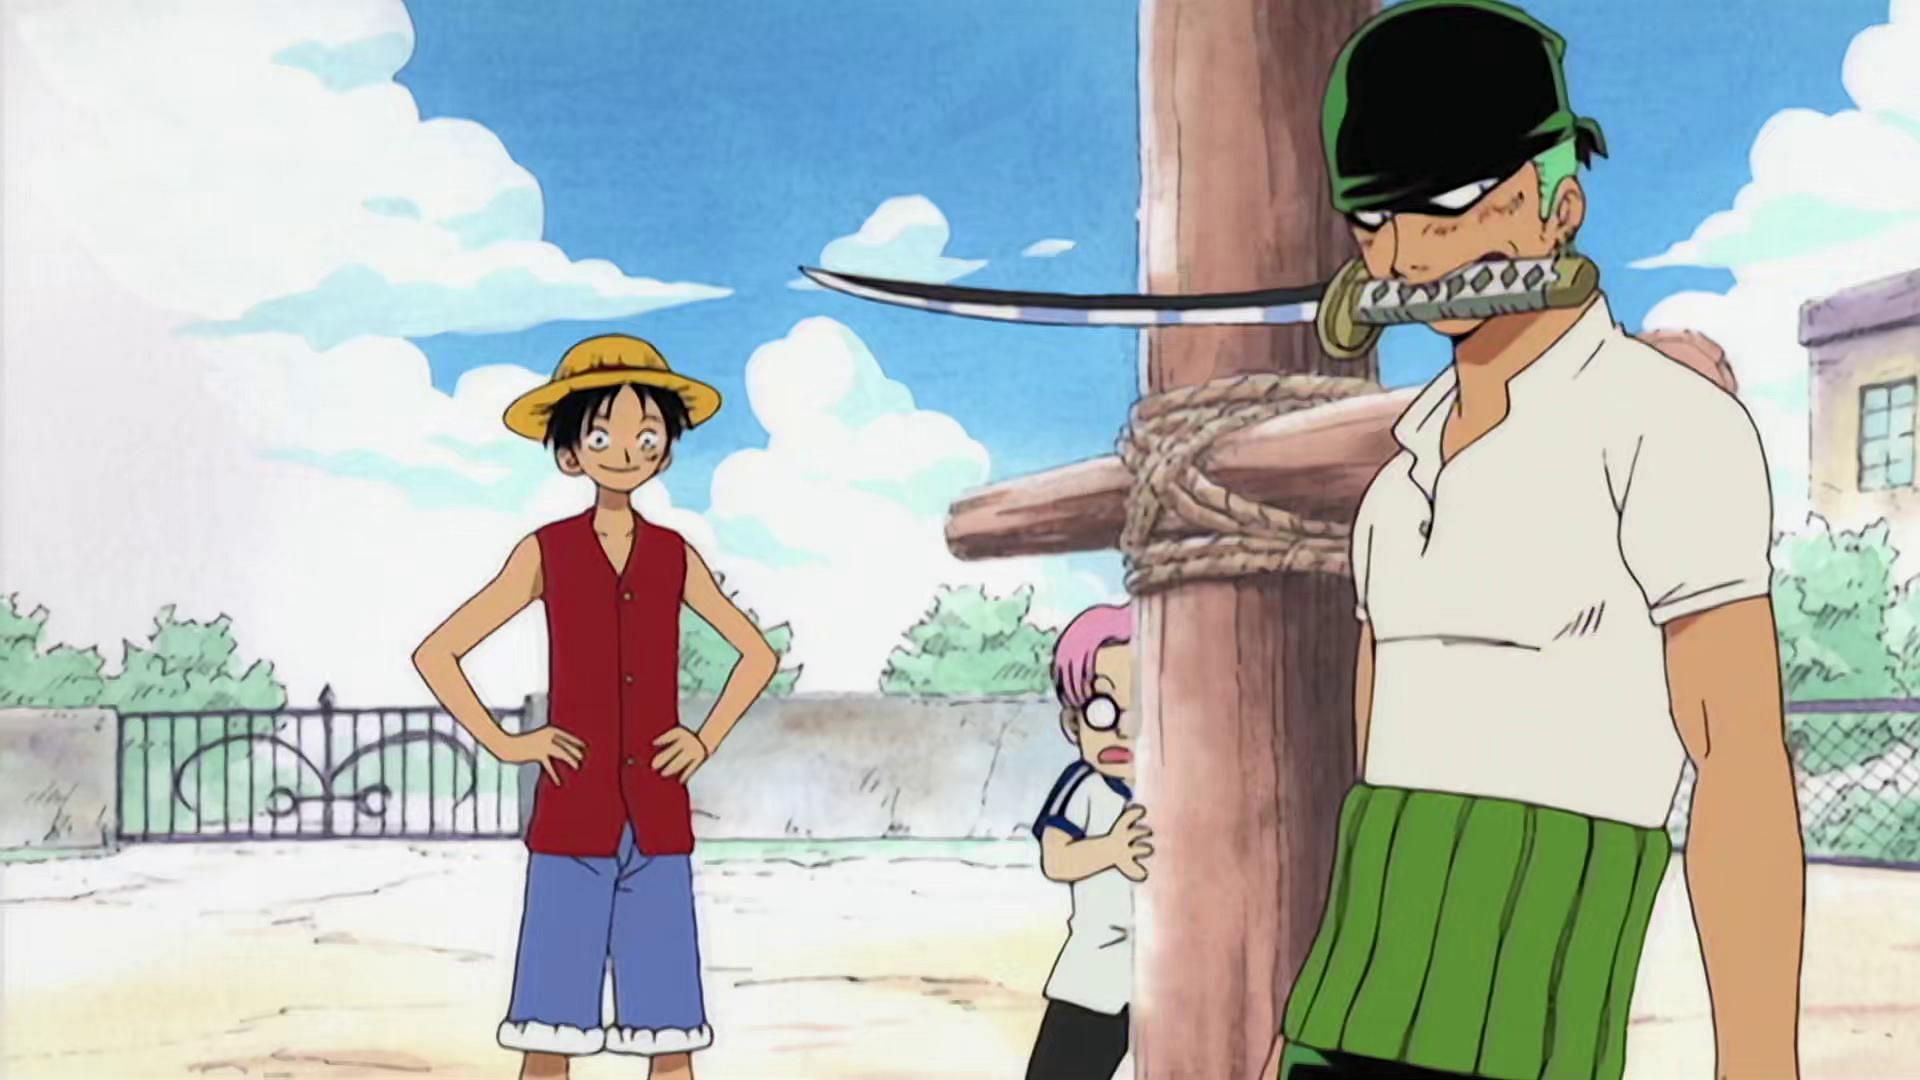 Luffy and Zoro at the beginning of their journey together (Image via Toei Animation, One Piece)